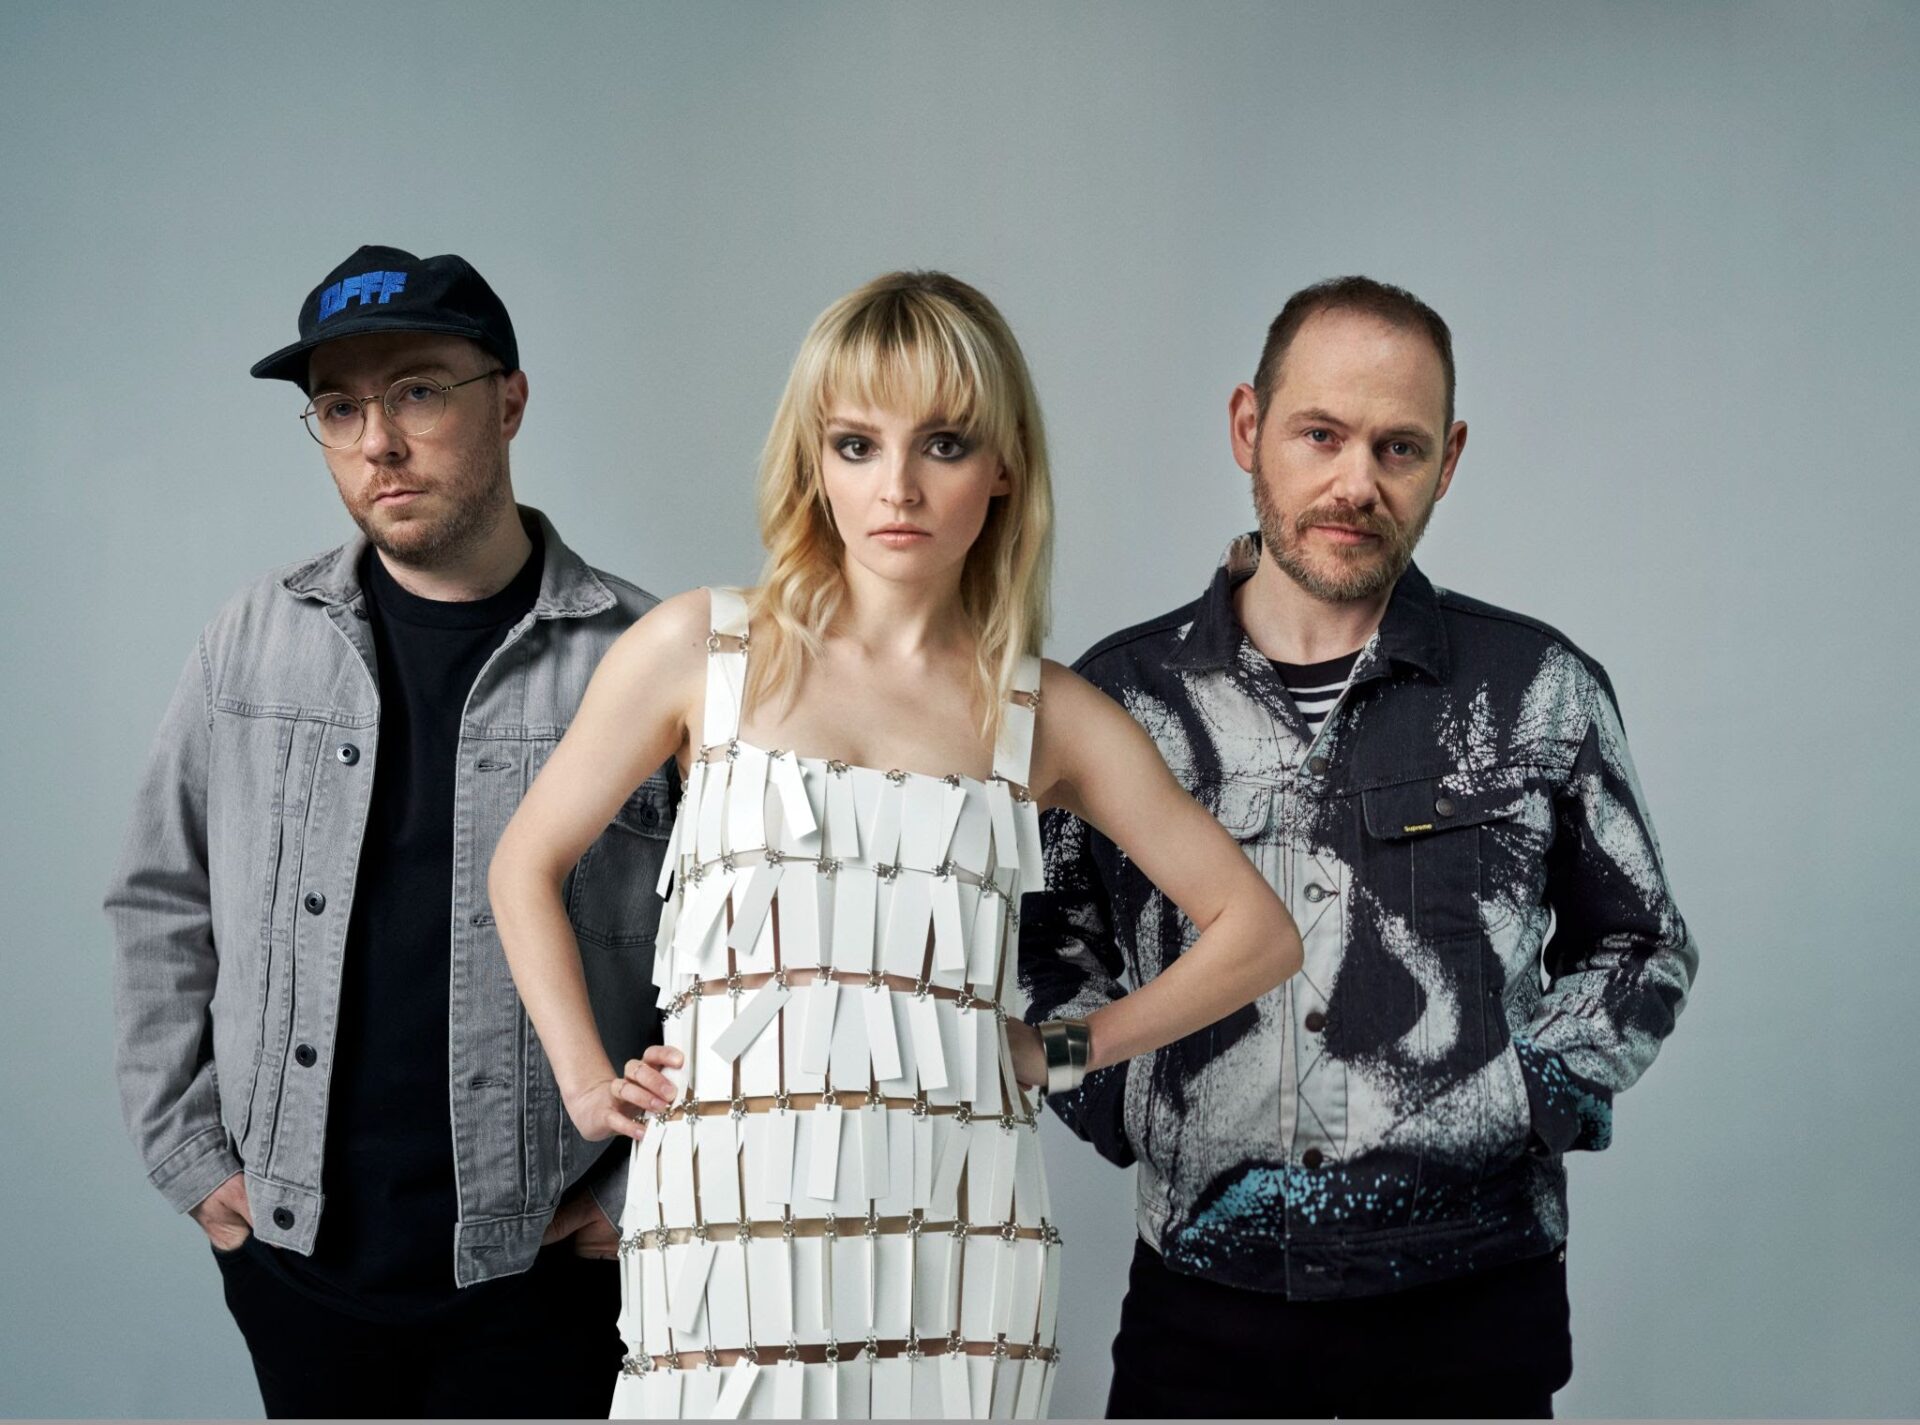 NEWS: CHVRCHES cover 'Cry Little Sister' from Lost Boys for new Netflix film